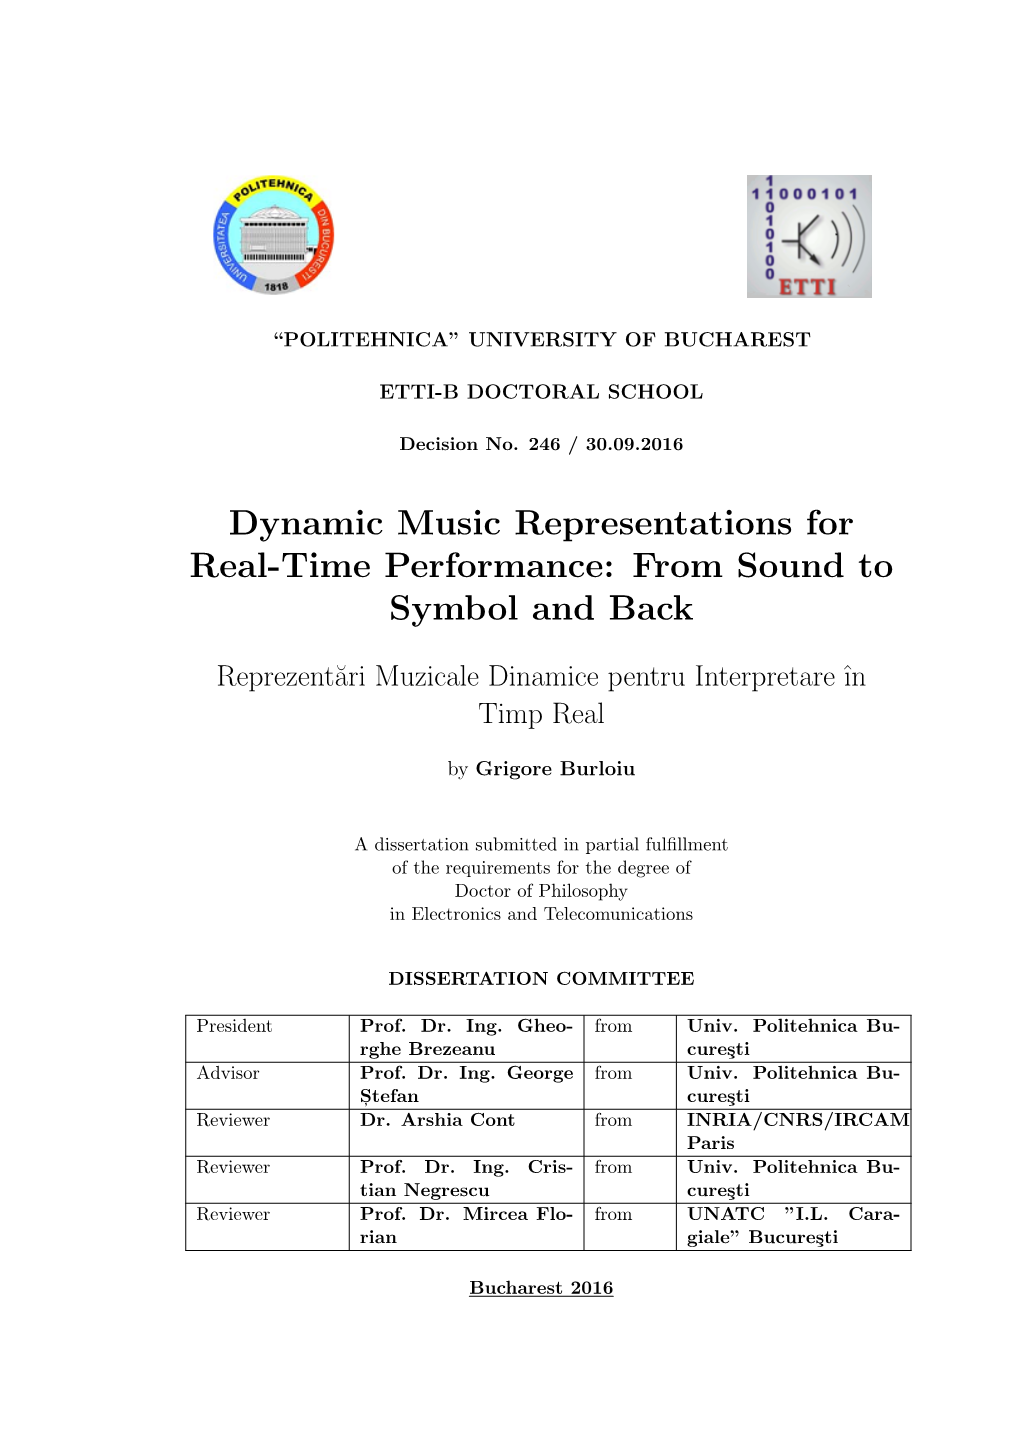 Dynamic Music Representations for Real-Time Performance: from Sound to Symbol and Back